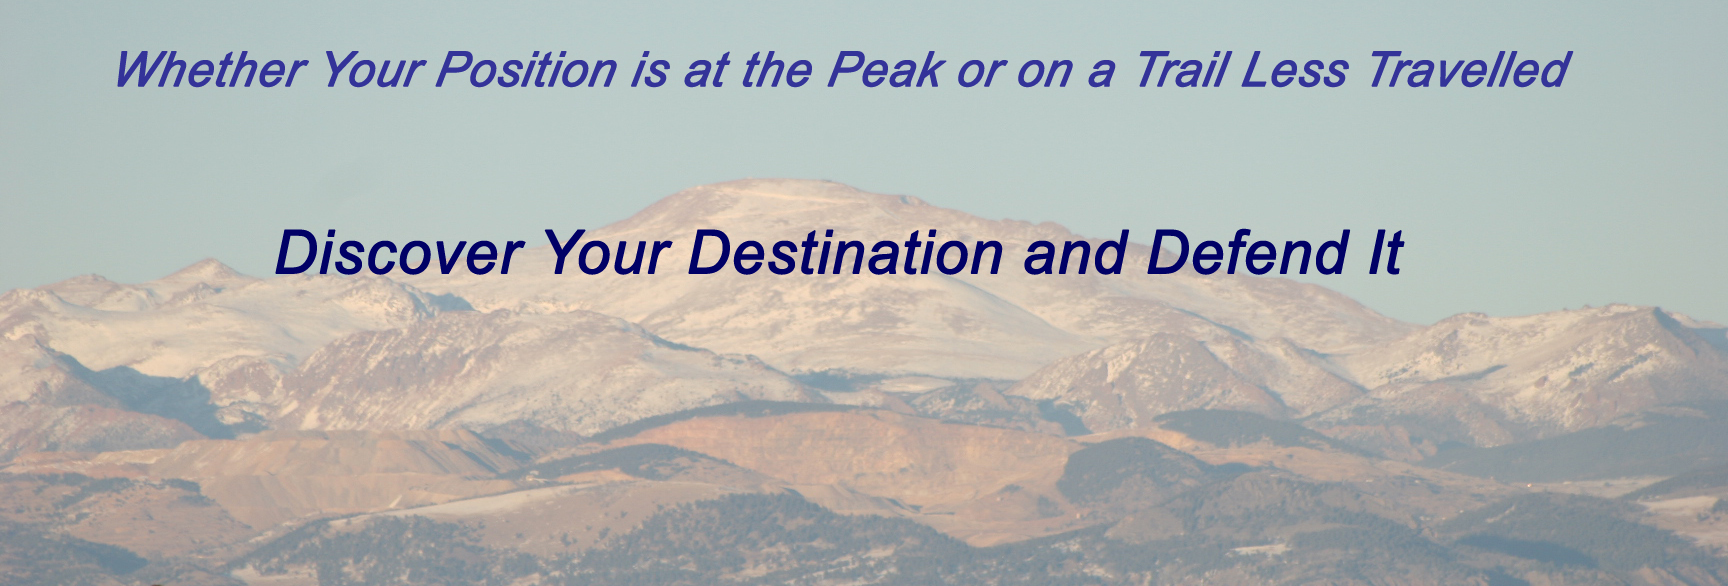 Whether Your Position is at the Peak or on a Trail Less Traveled Discover Your Destination and Defend It